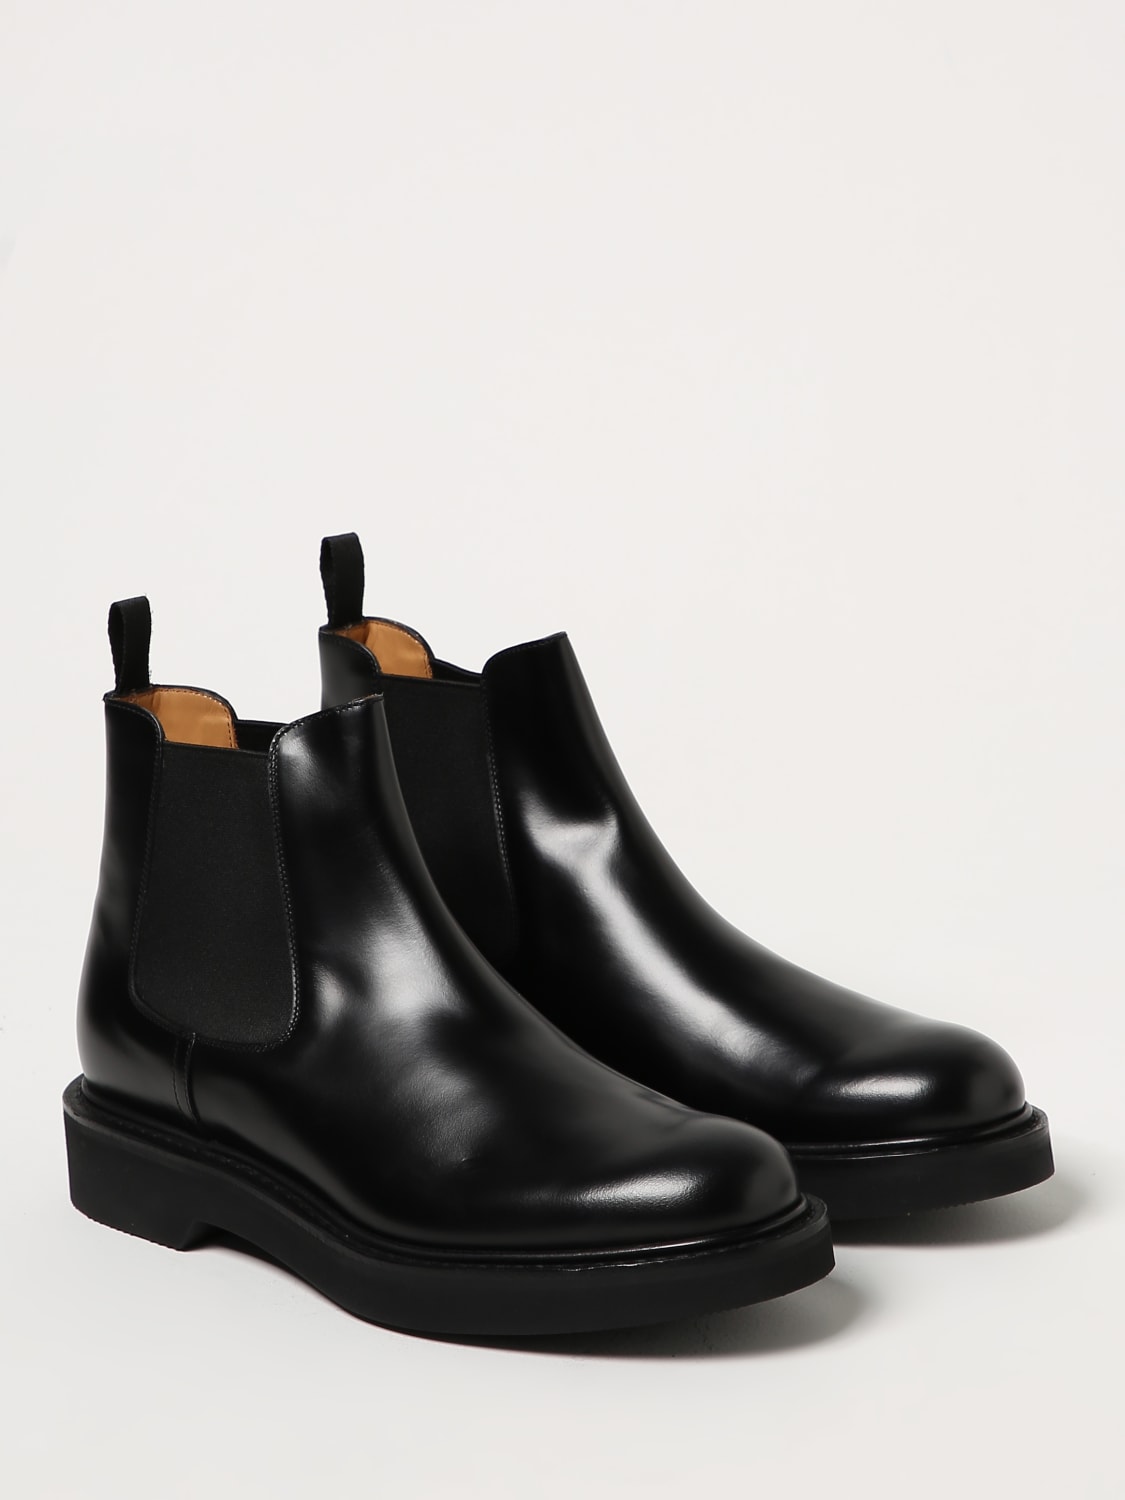 CHURCH'S: Leicester leather ankle boots - Black | Church's boots ...